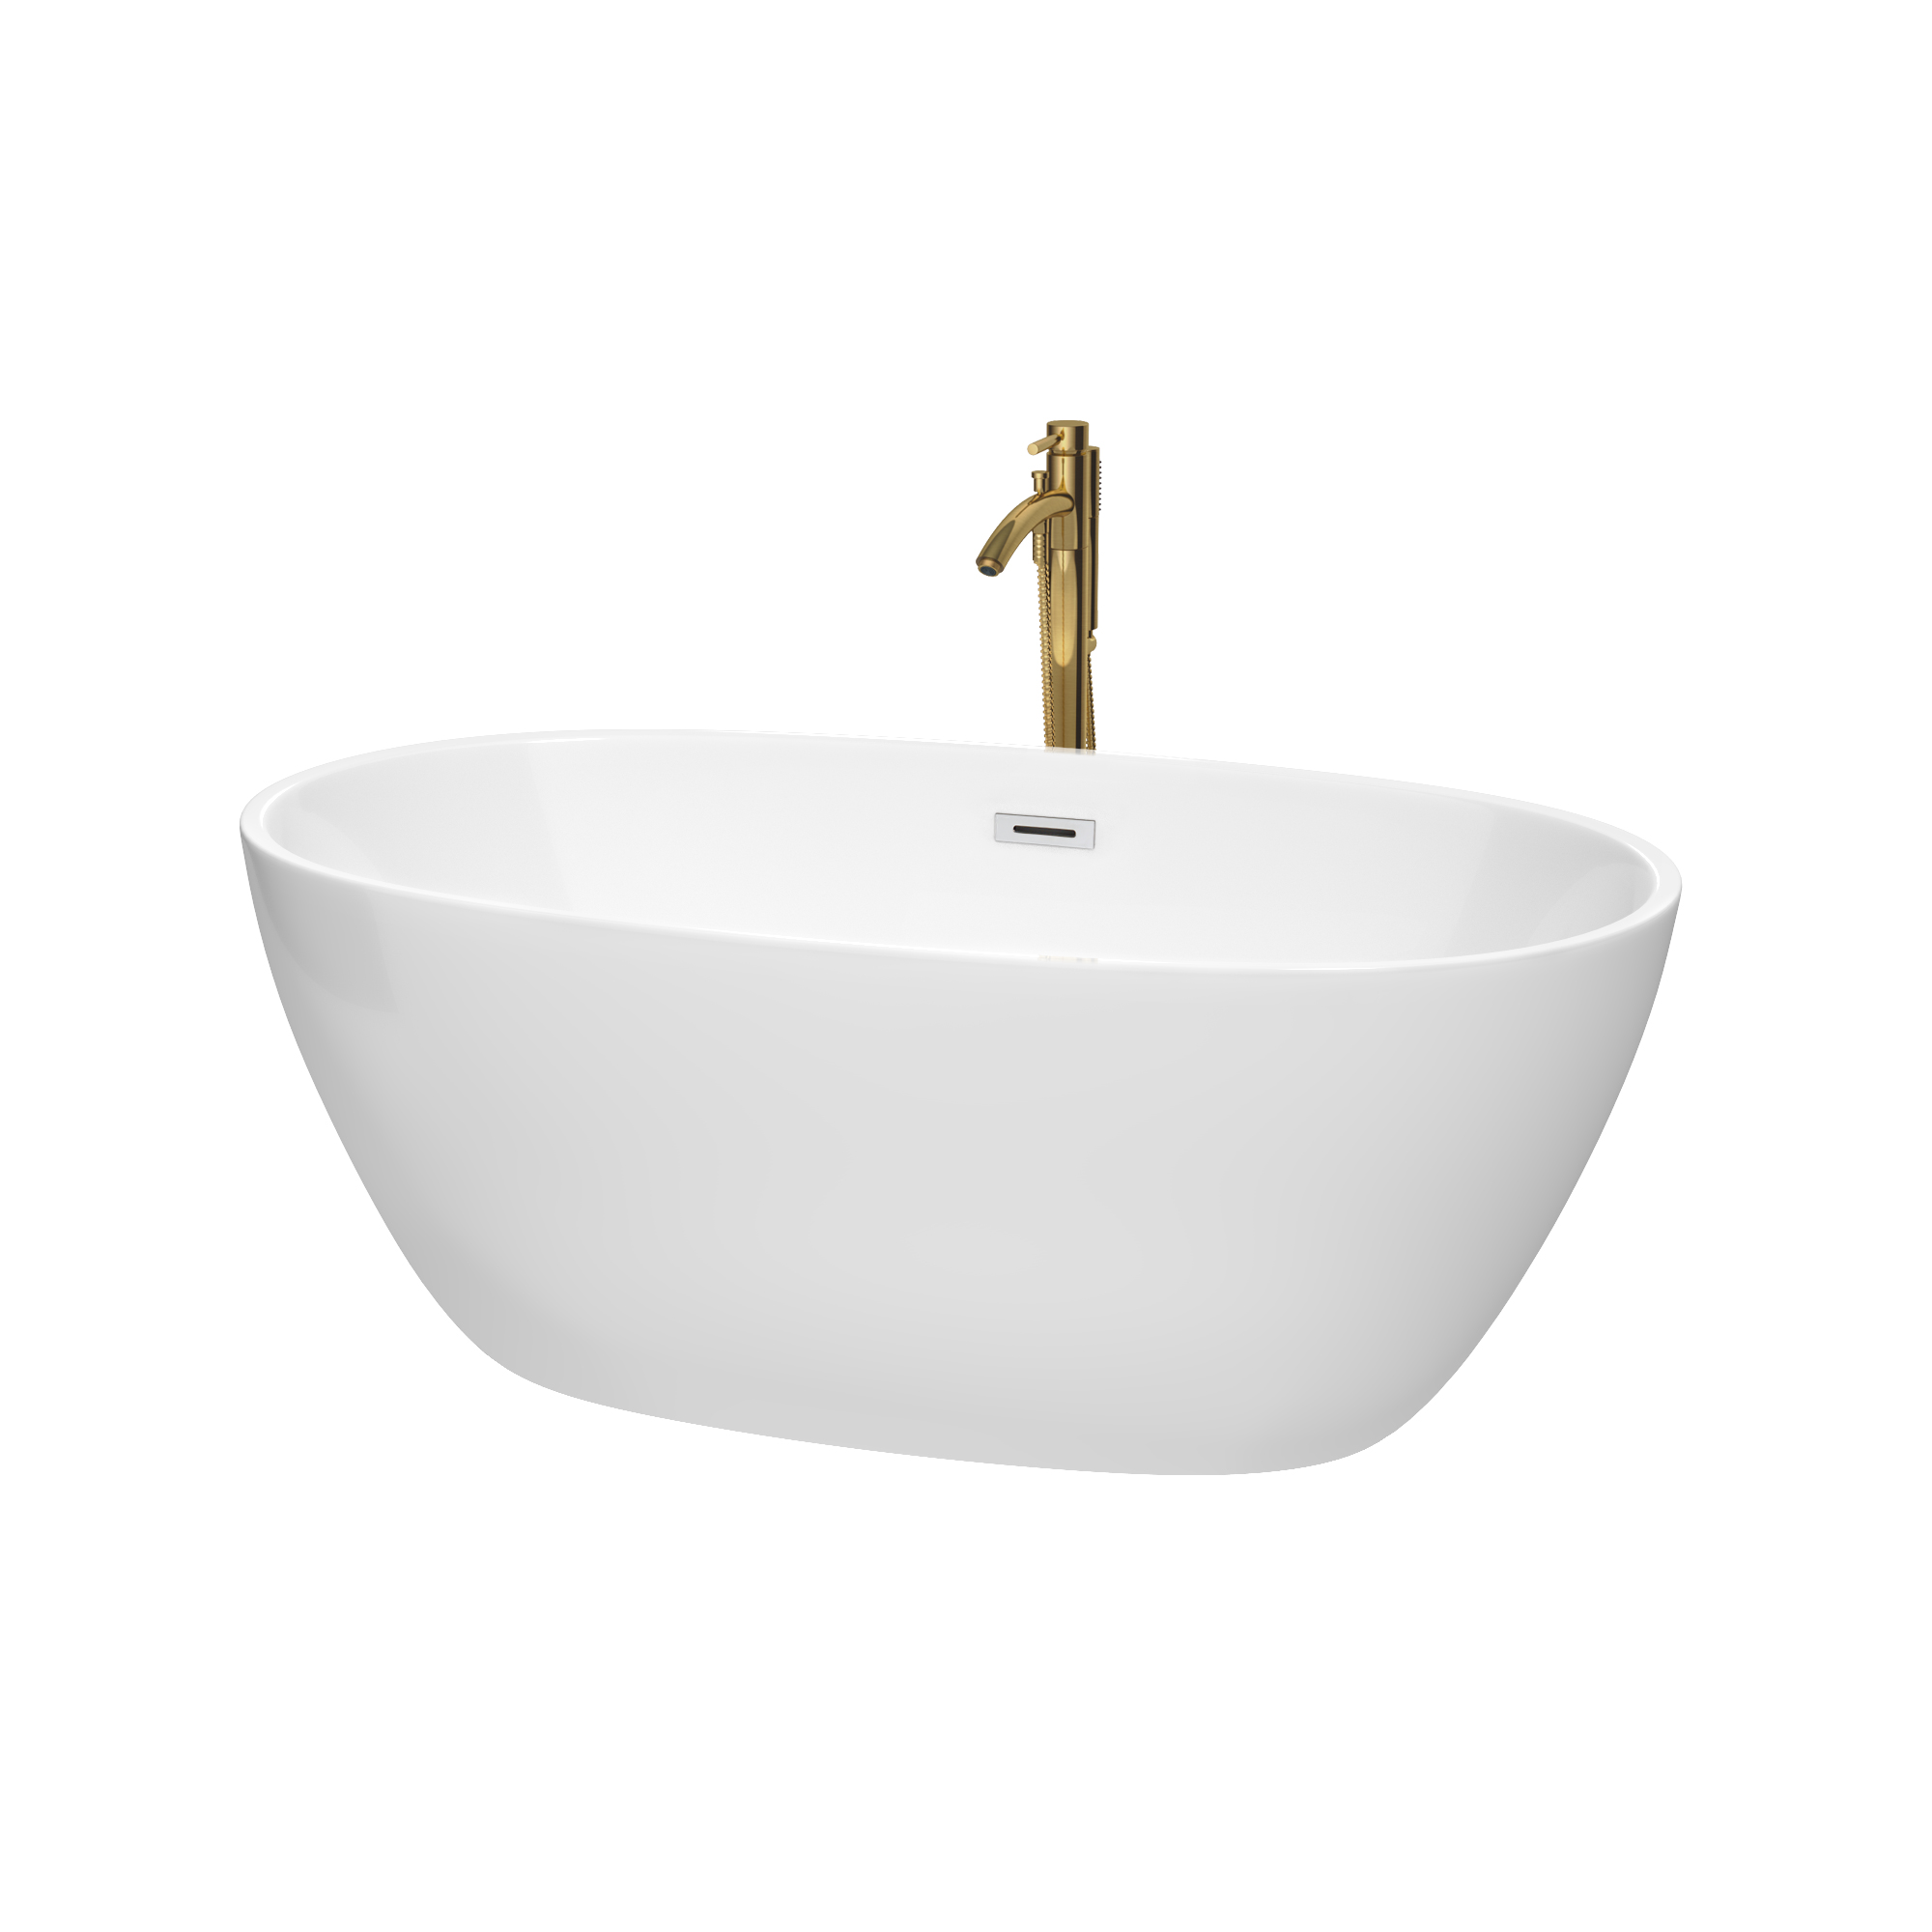 59" Freestanding Bathtub in White Finish with Polished Chrome Trim and Floor Mounted Faucet in Brushed Gold